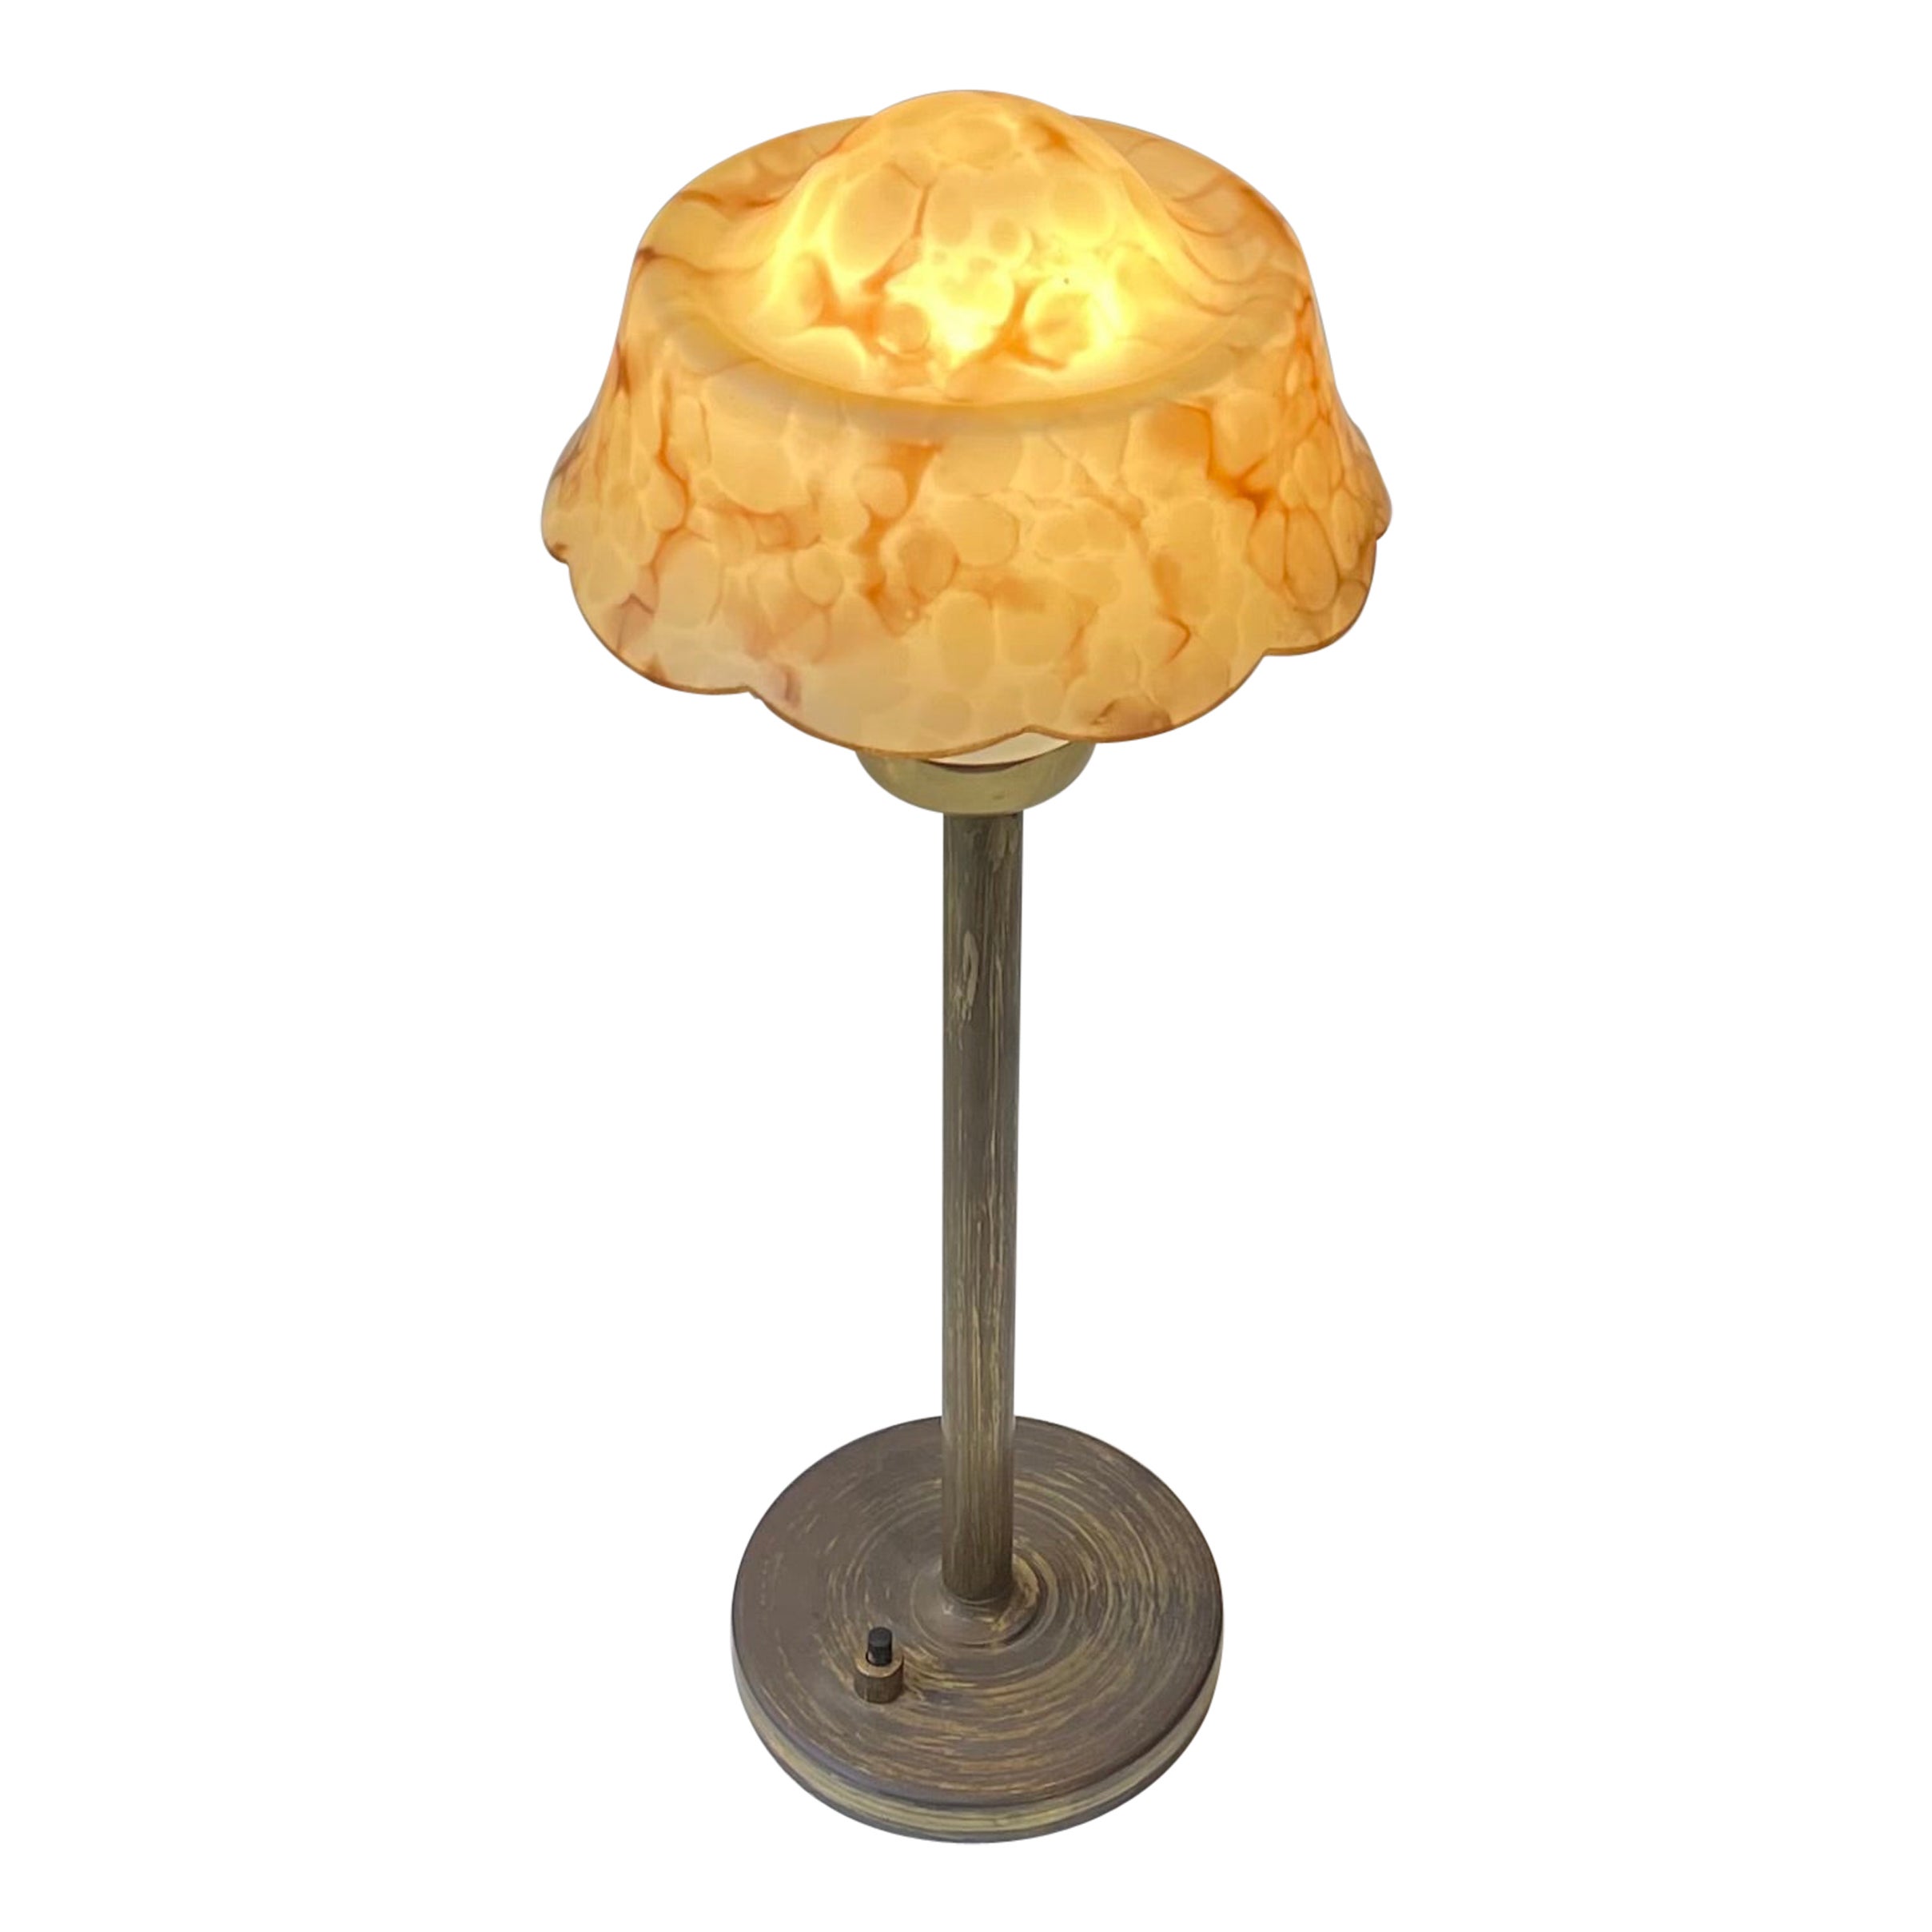 Danish Functionalist Table Lamp in Brass & Marble Glass by Fog & Mørup